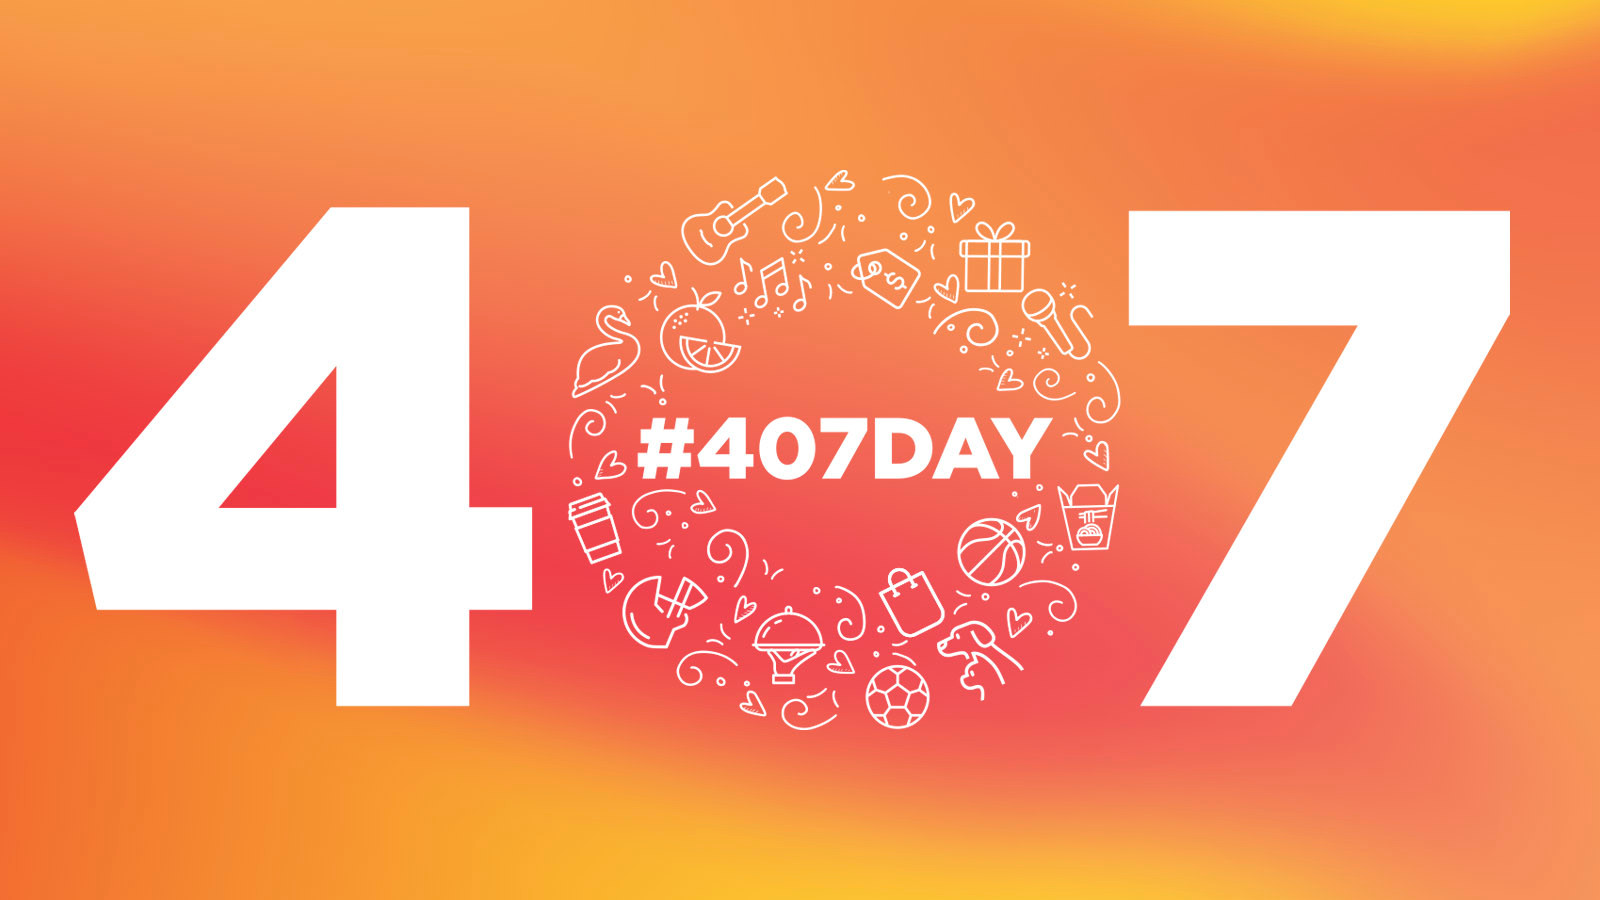 Visit Orlando is partnering with Orange County and the City of Orlando to support local businesses as part of #407Day